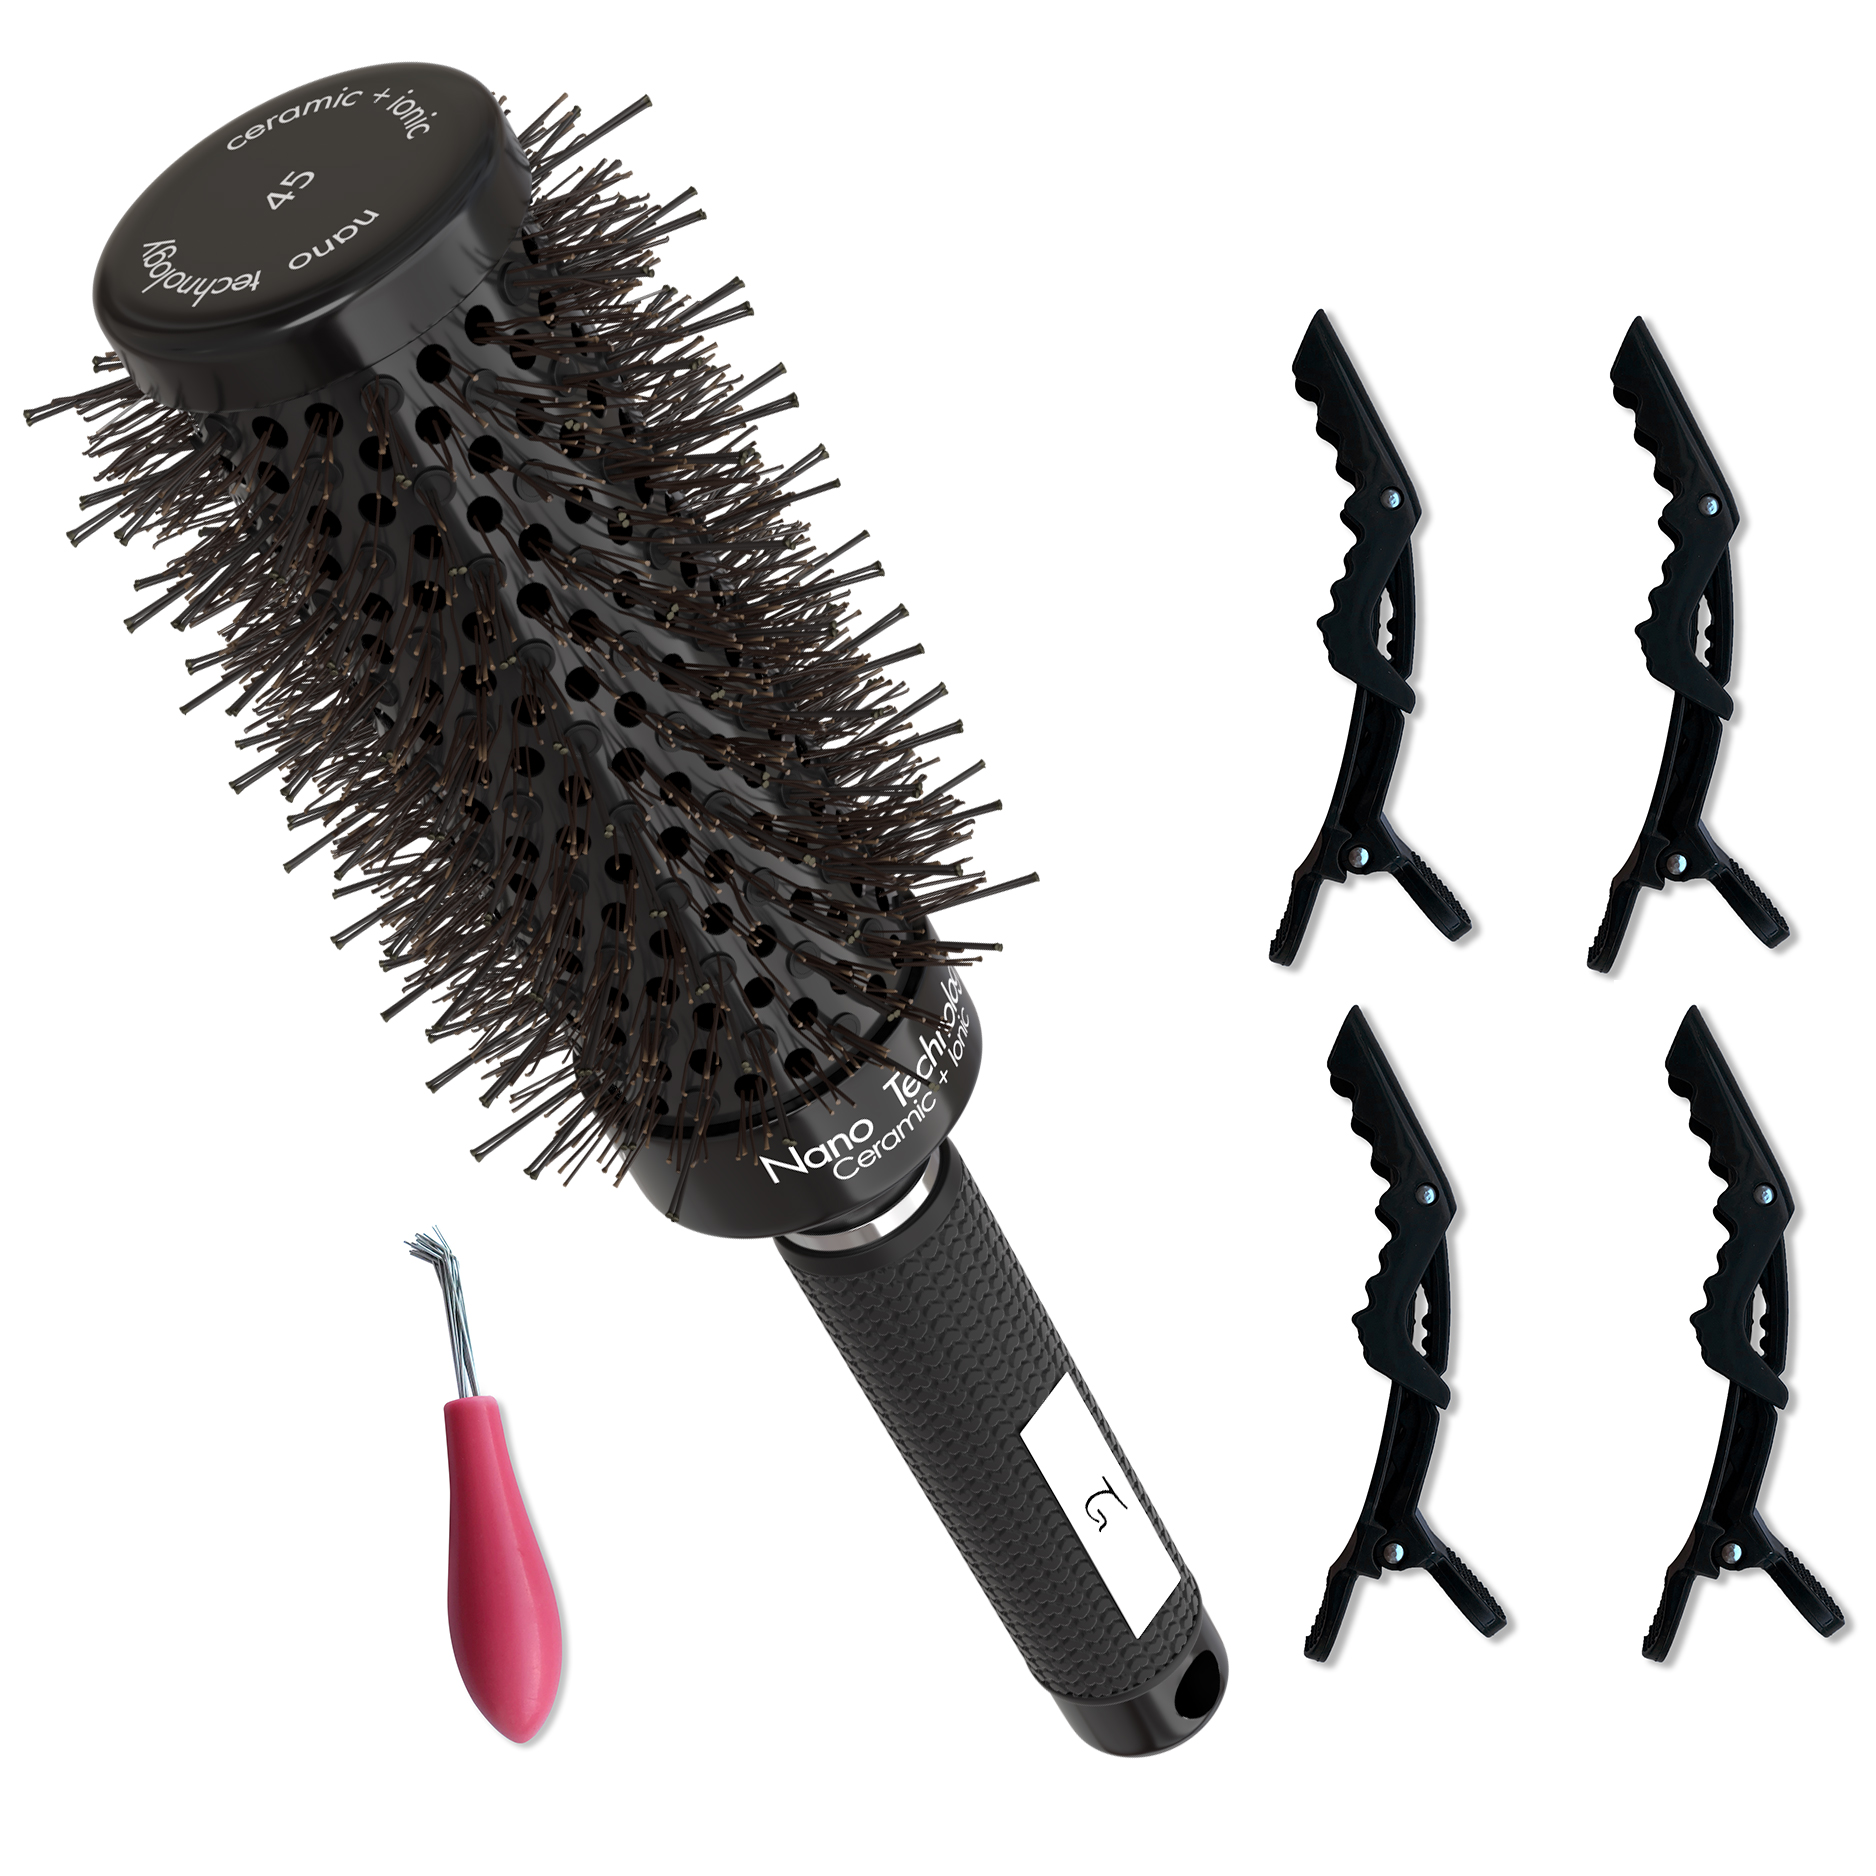 Medium-Large Round Brush for Blow Drying with Natural Boar Bristle | Nano  Thermal Ceramic and Ionic for Styling , Healthy Hair and Extra Volume | Hair  Brush, 4 Styling Clips, Cleaner (1,8